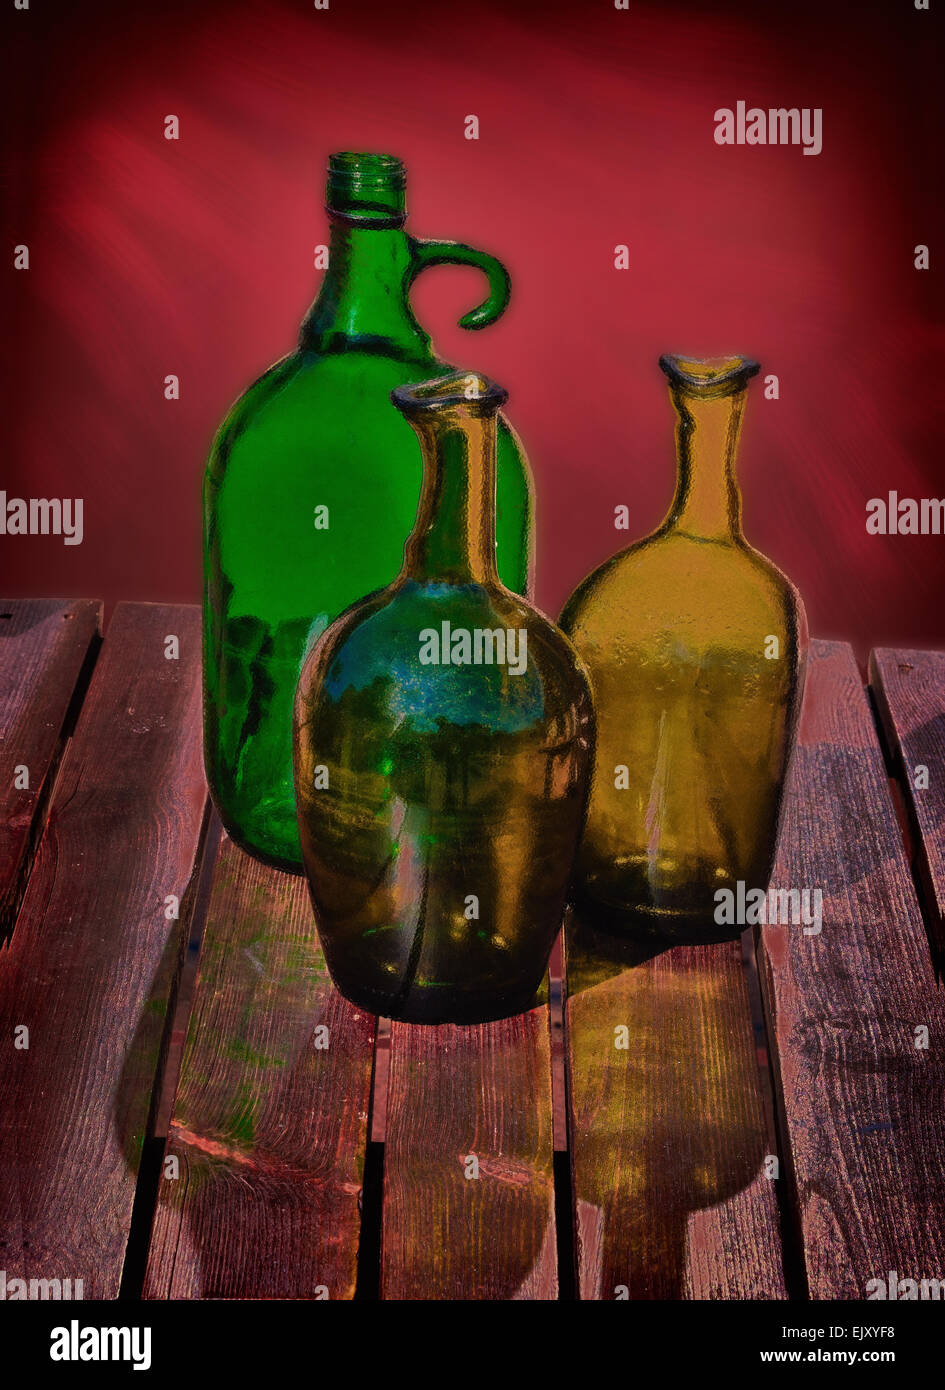 Download Three Empty Green Bottles Of Wine On A Wooden Table Style Of Oil Stock Photo Alamy PSD Mockup Templates